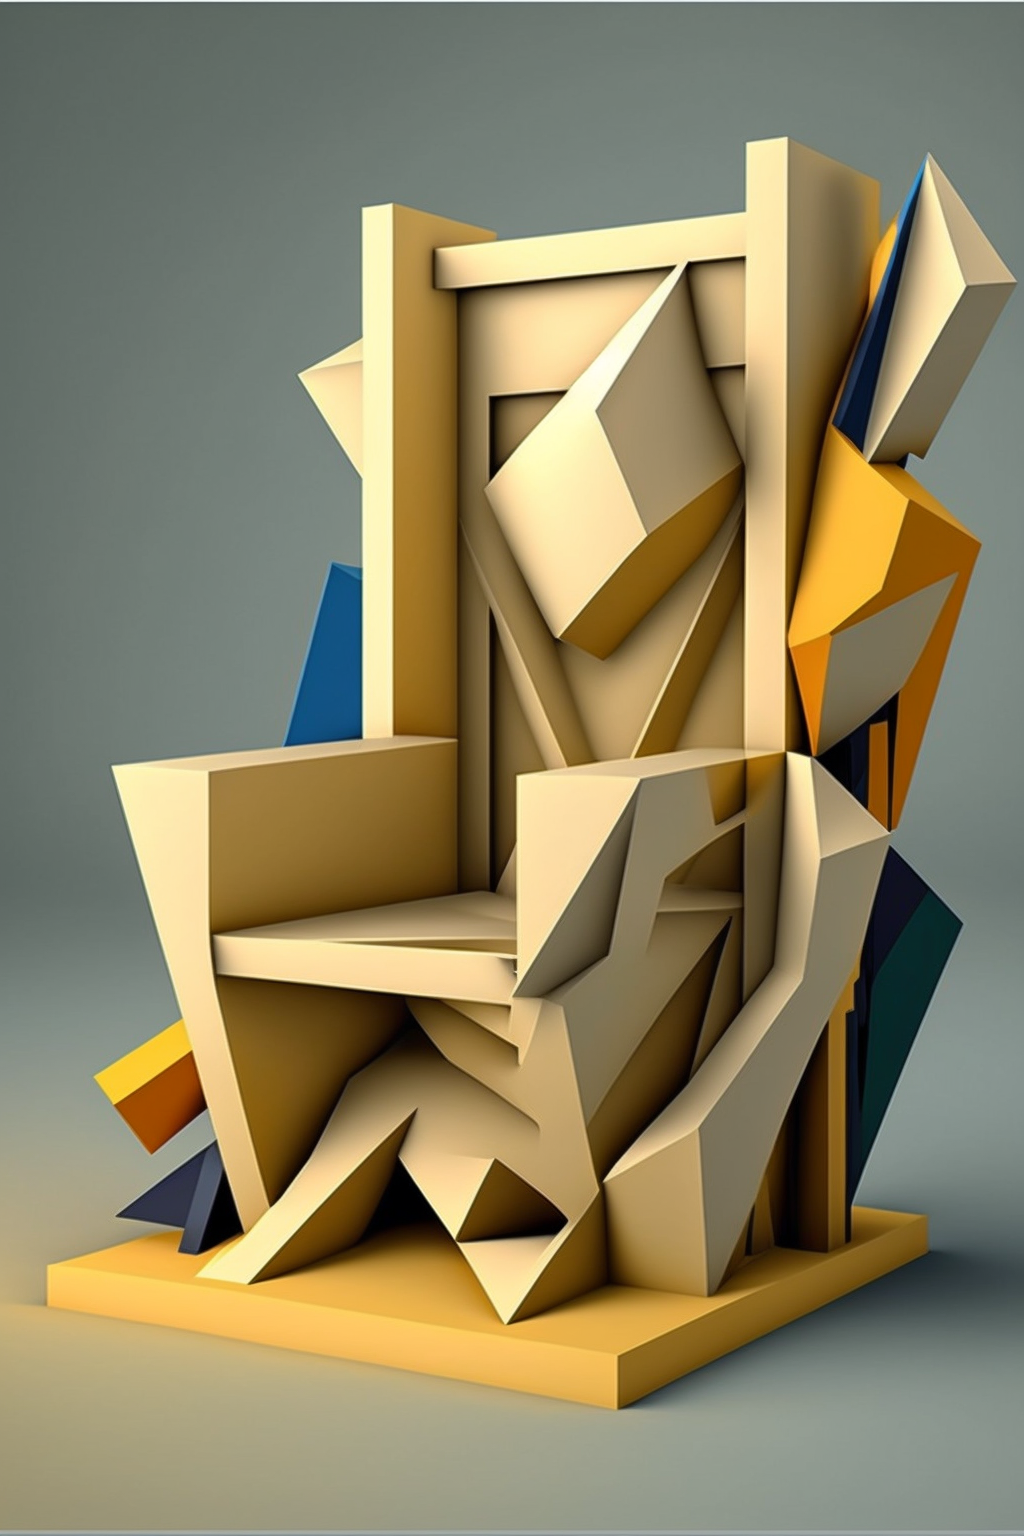 Chair in the style of Hyper-Dimensional Cubism 2